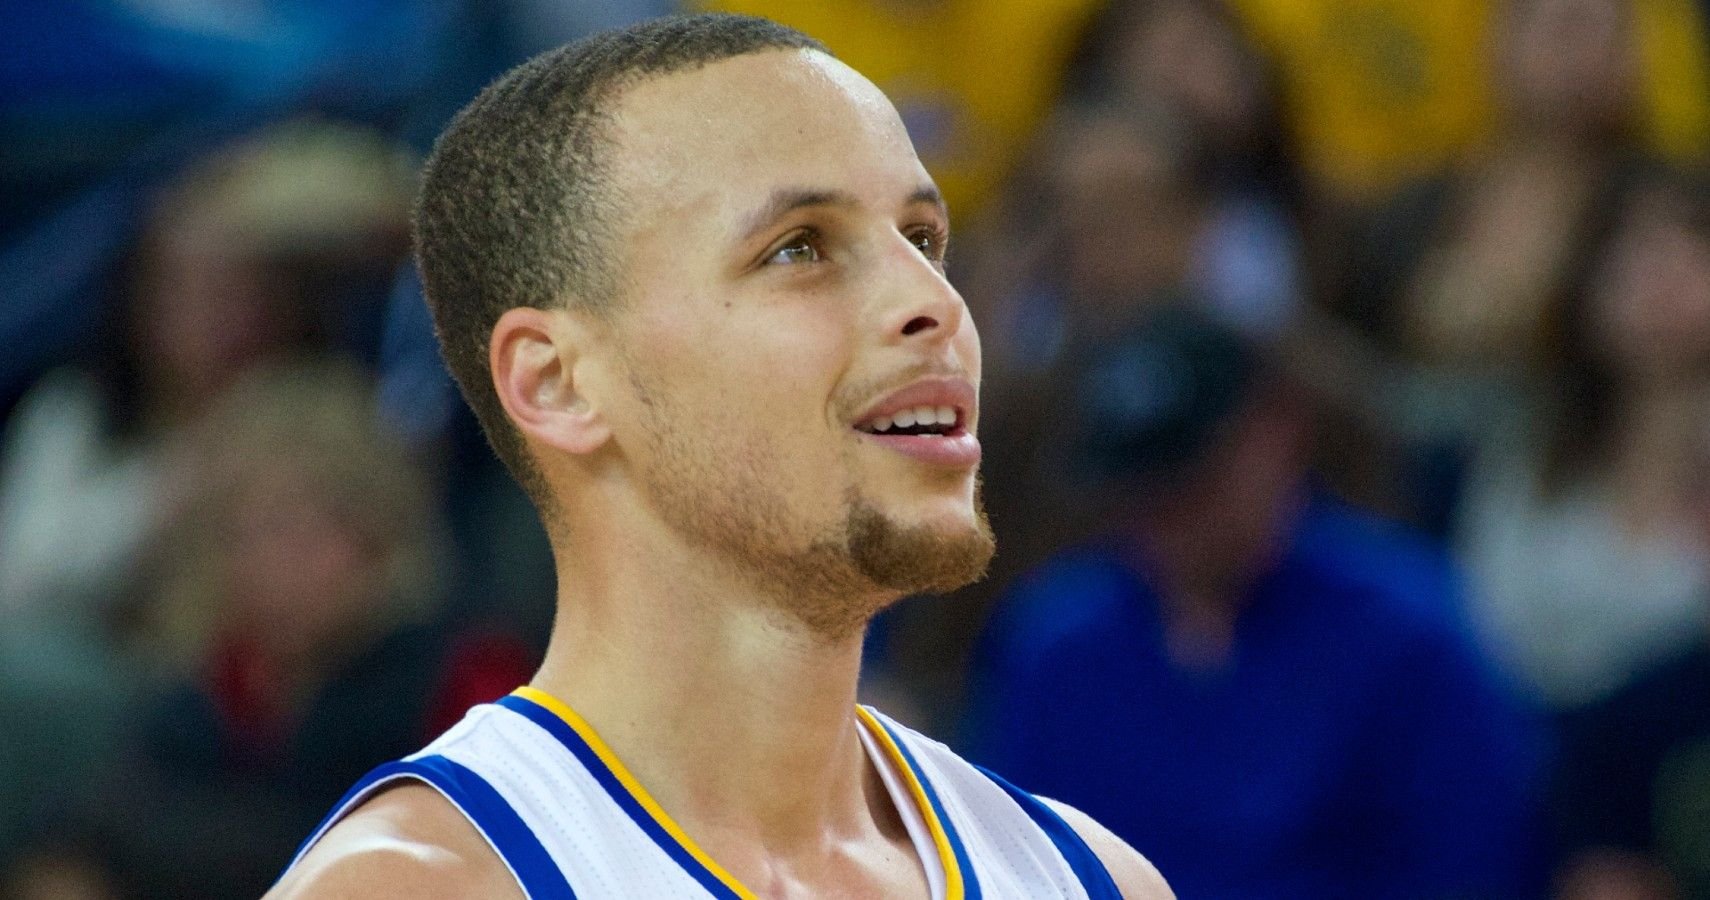 6 Ways NBA Star Steph Curry Spent His Millions